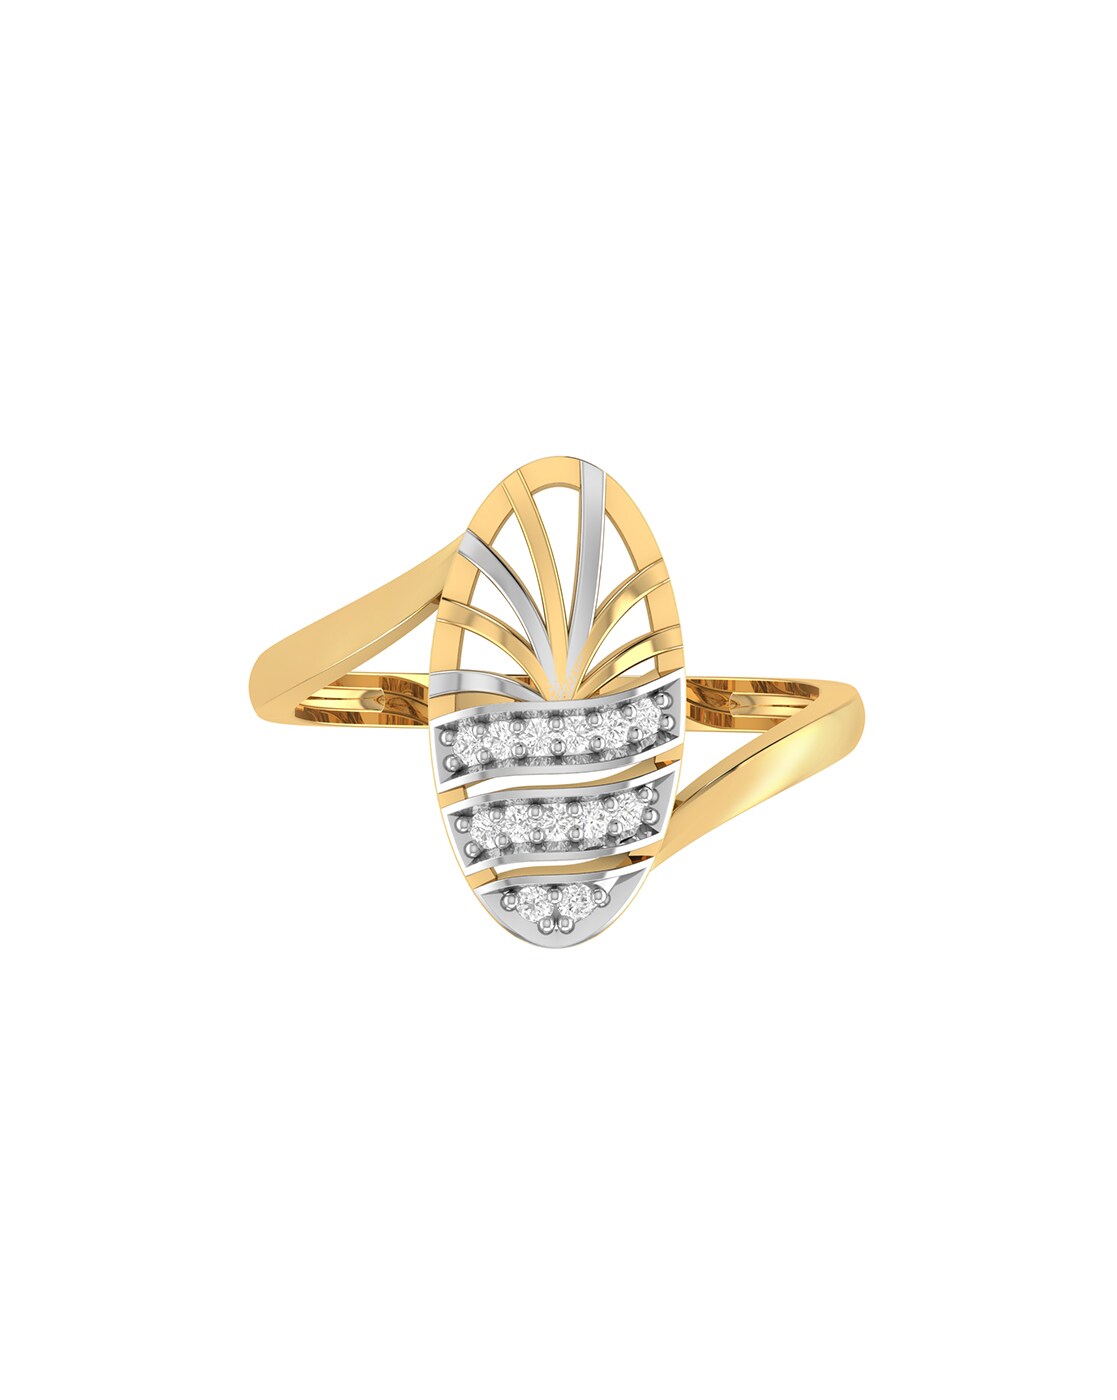 Graceful Waves: Stone-Encrusted 22KT Gold Ring | Buy at Bhima Gold Online